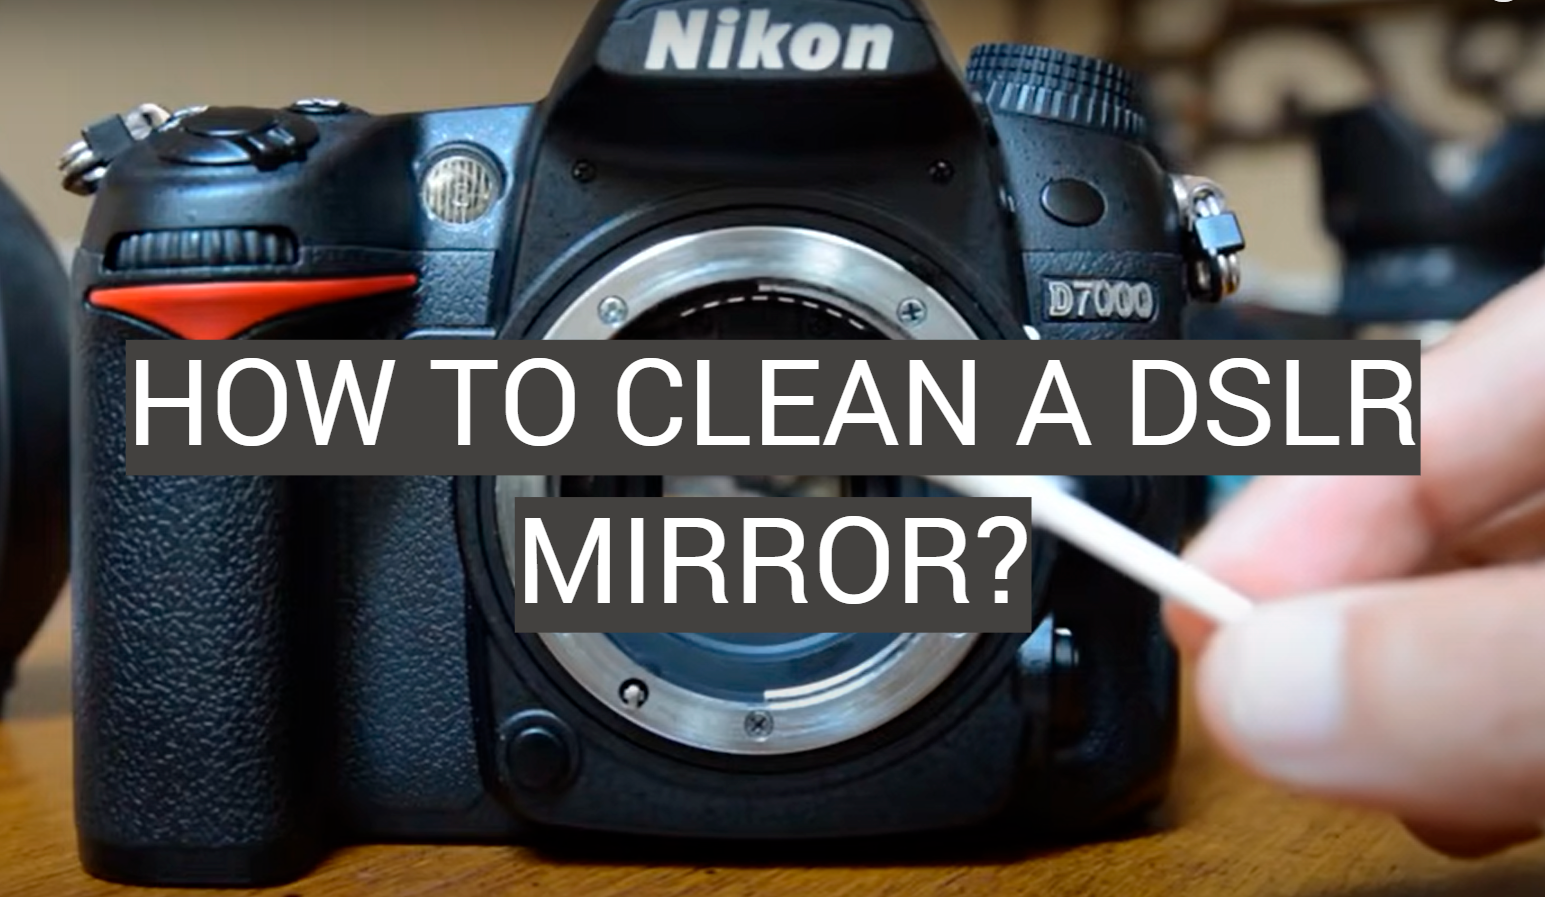 How to Clean a DSLR Mirror?